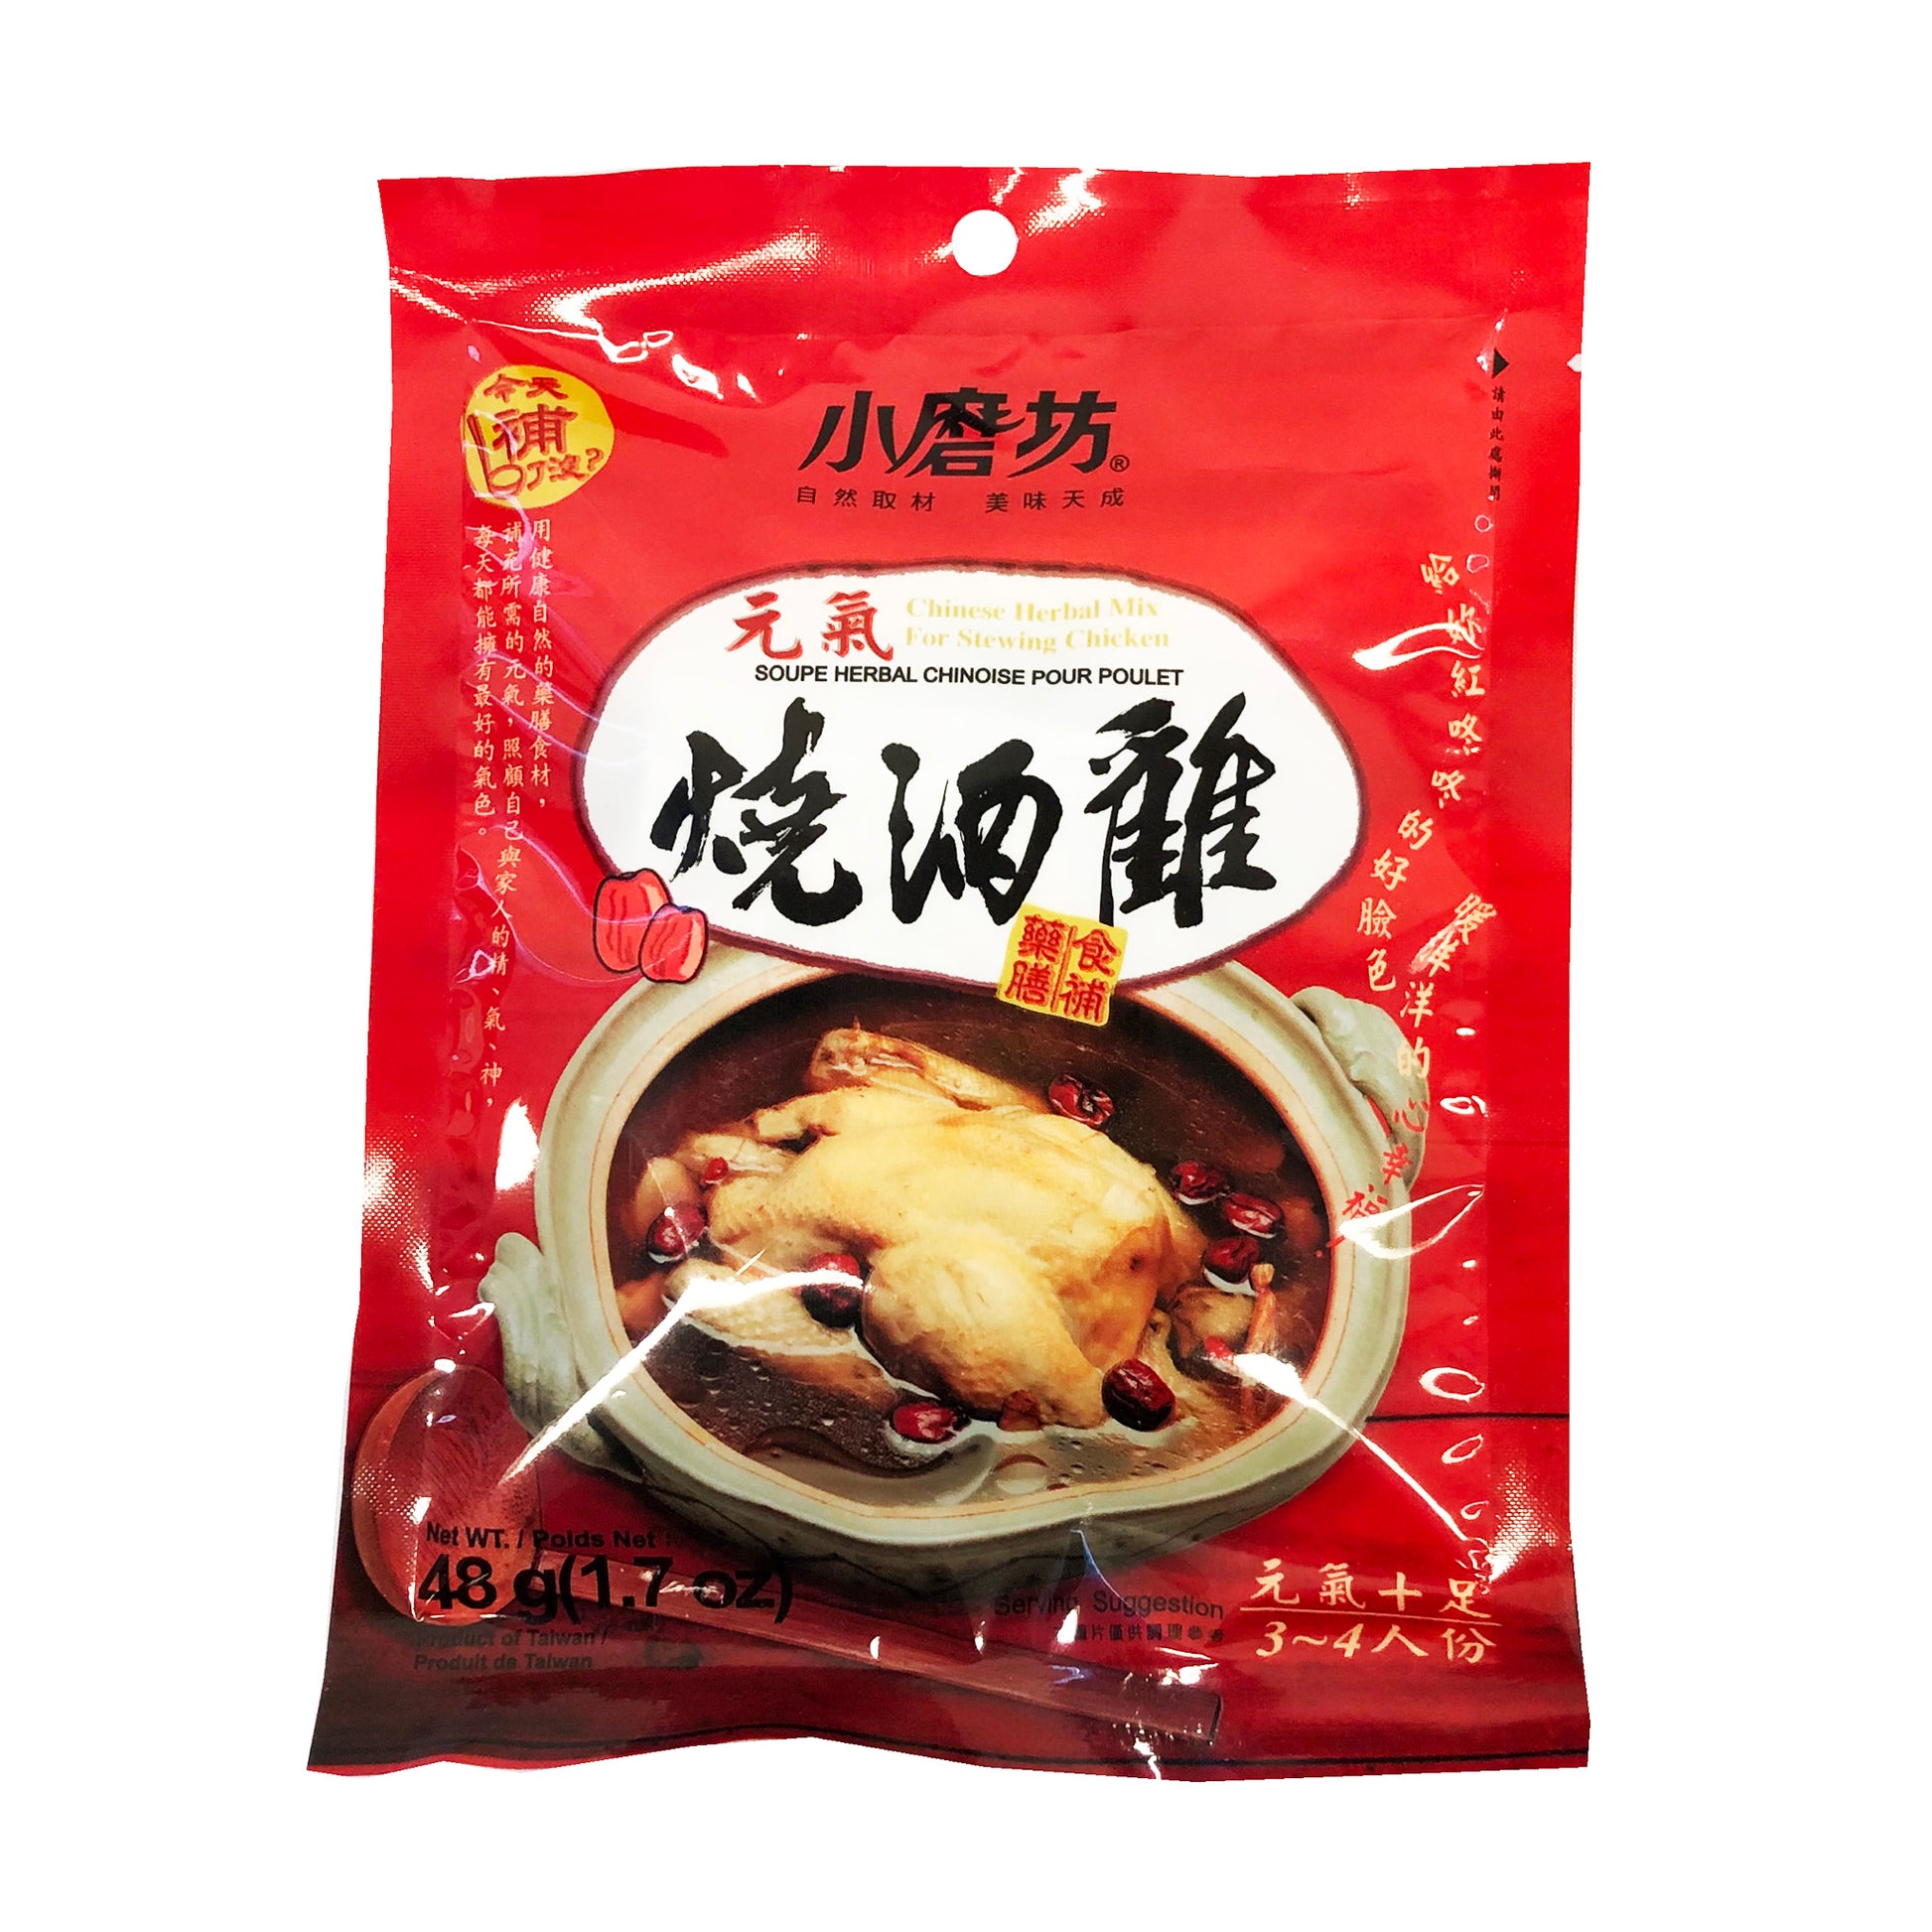 Front graphic image of Tomax Chinese Herbal Mix for Stewing Chicken 1.7oz